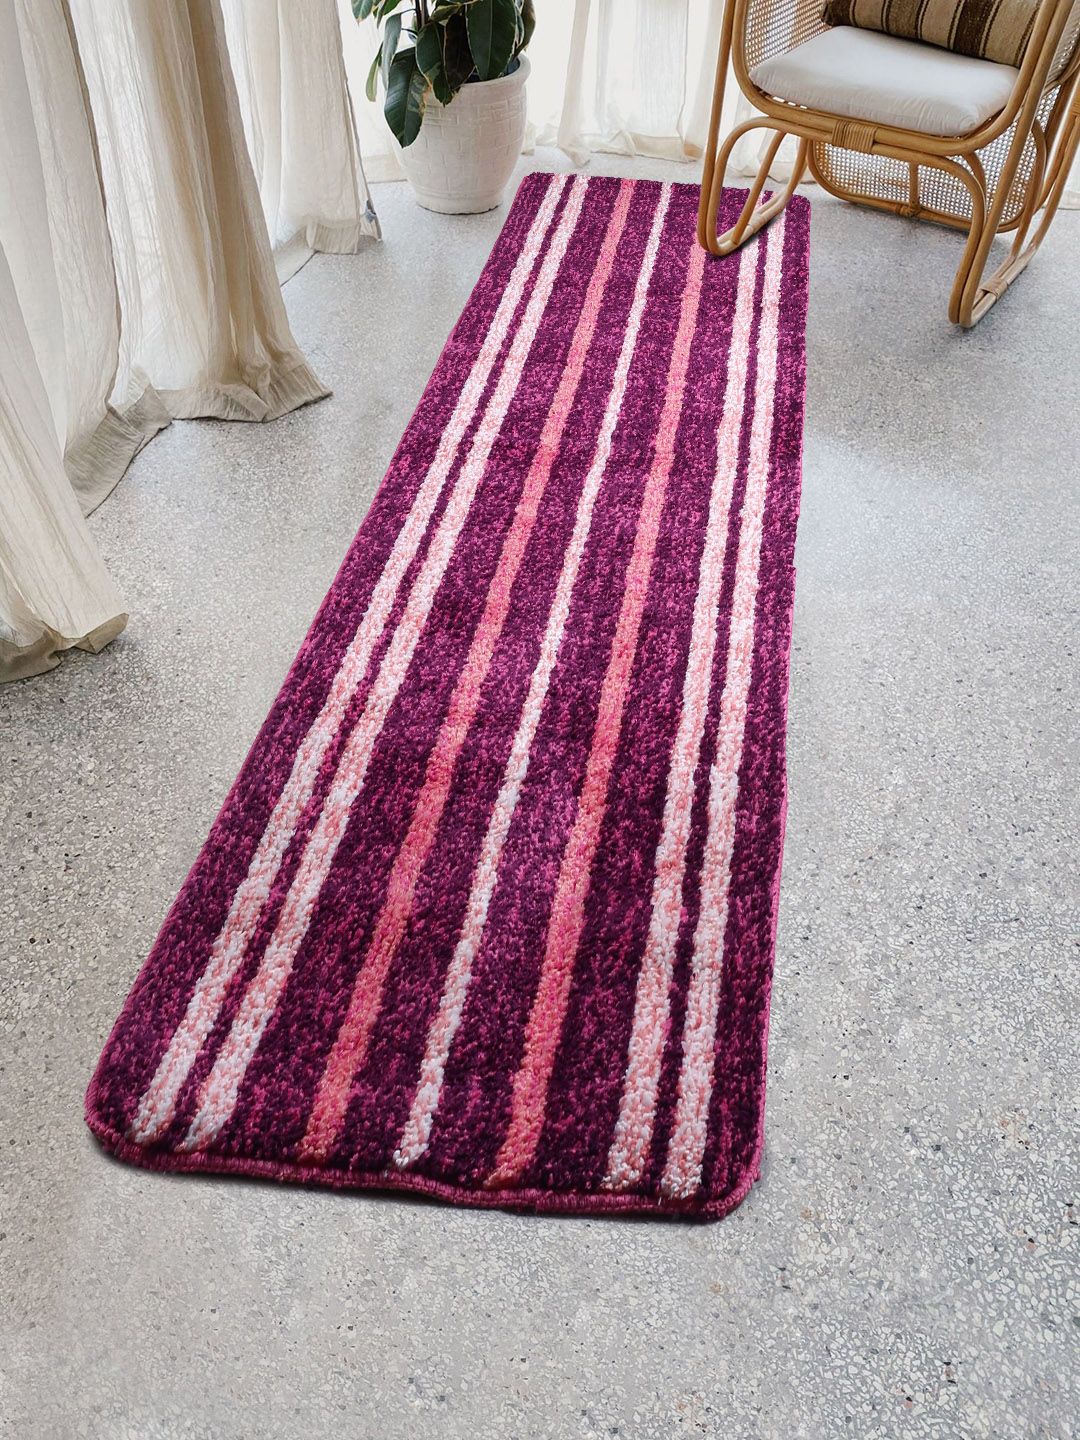 Saral Home Pink Striped Anti-Skid Floor Runner Price in India